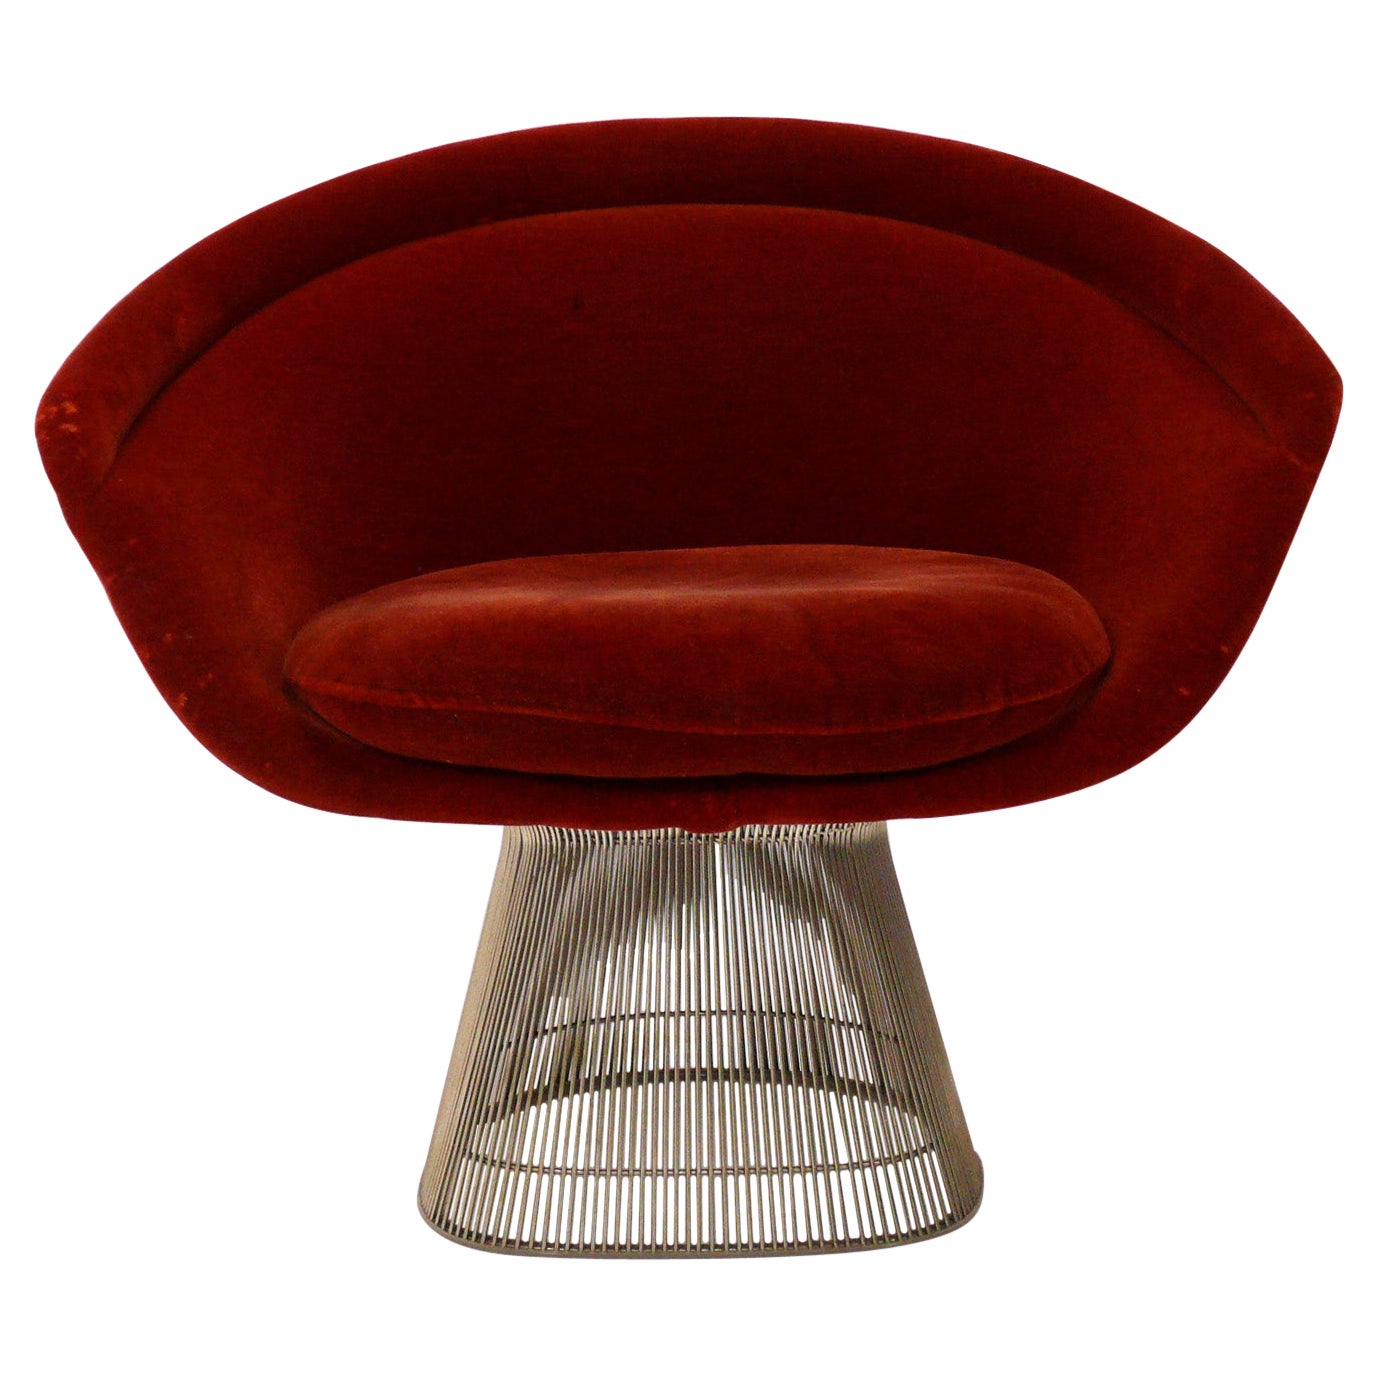 Warren Platner for Knoll Nickel Lounge Chair Reupholstered in Your Fabric